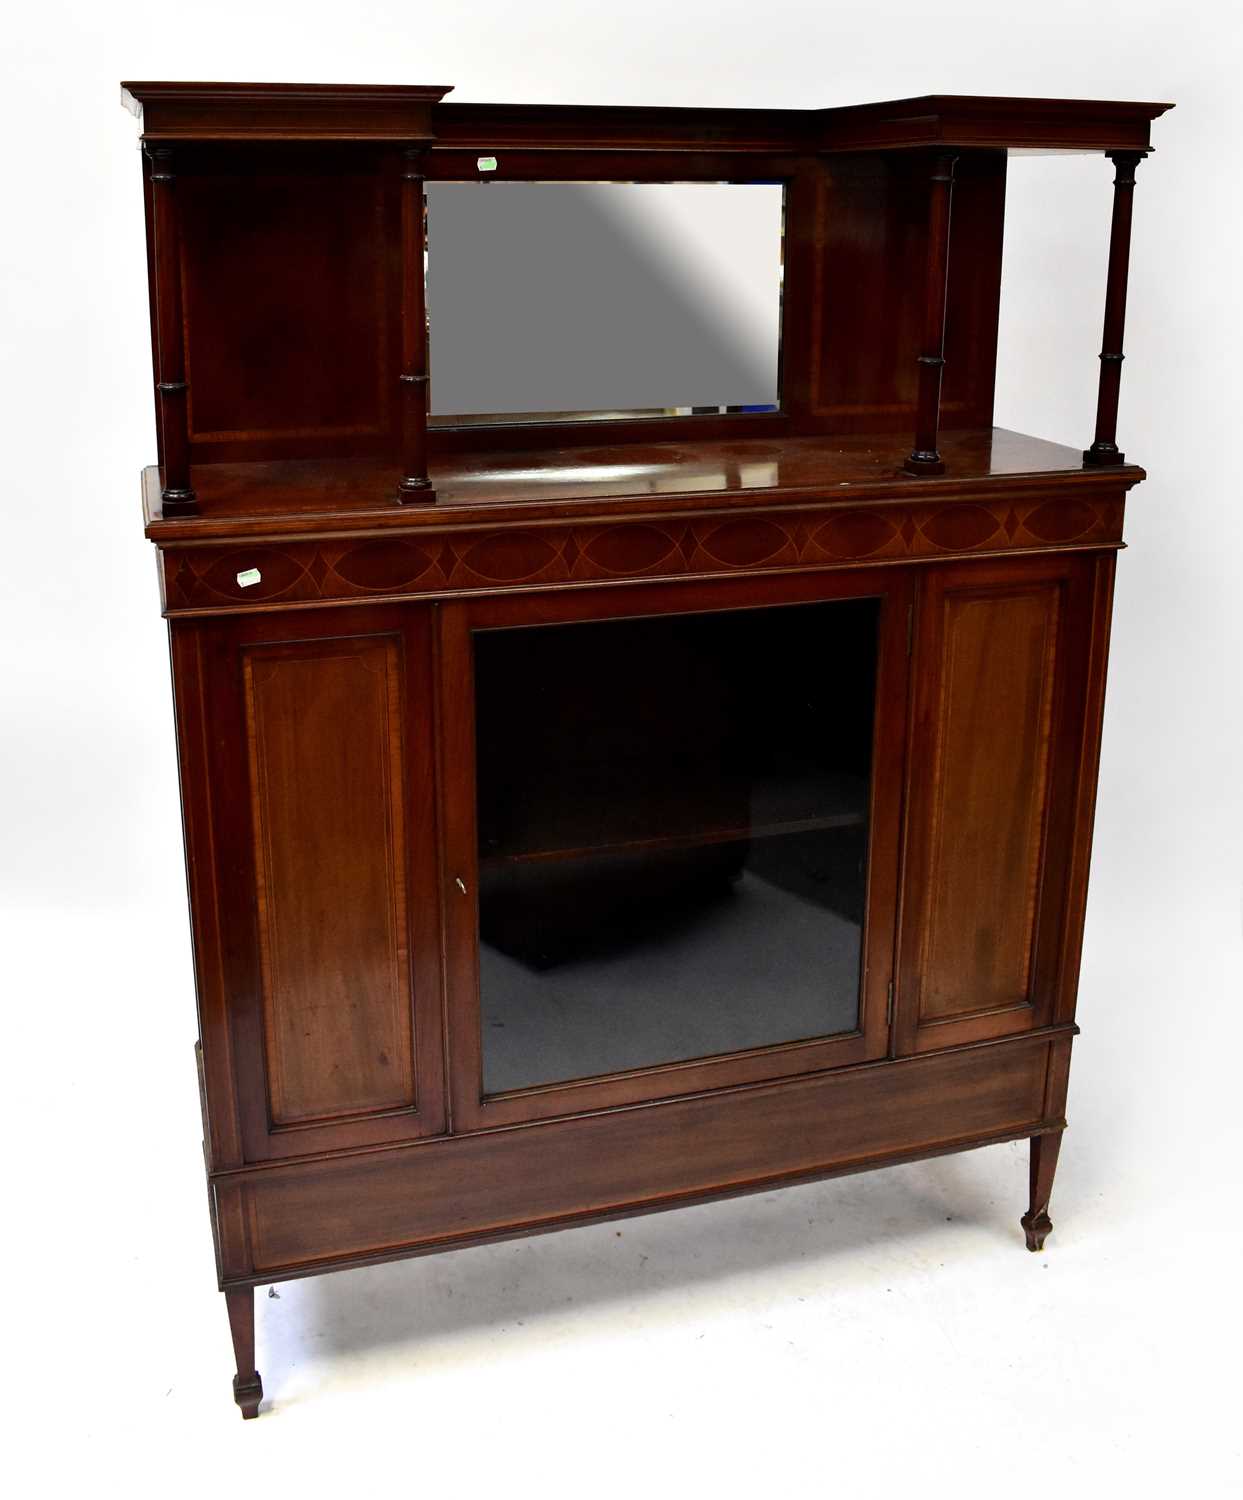 An Edwardian inlaid mirror back display cabinet with galleried top above single glazed door, on